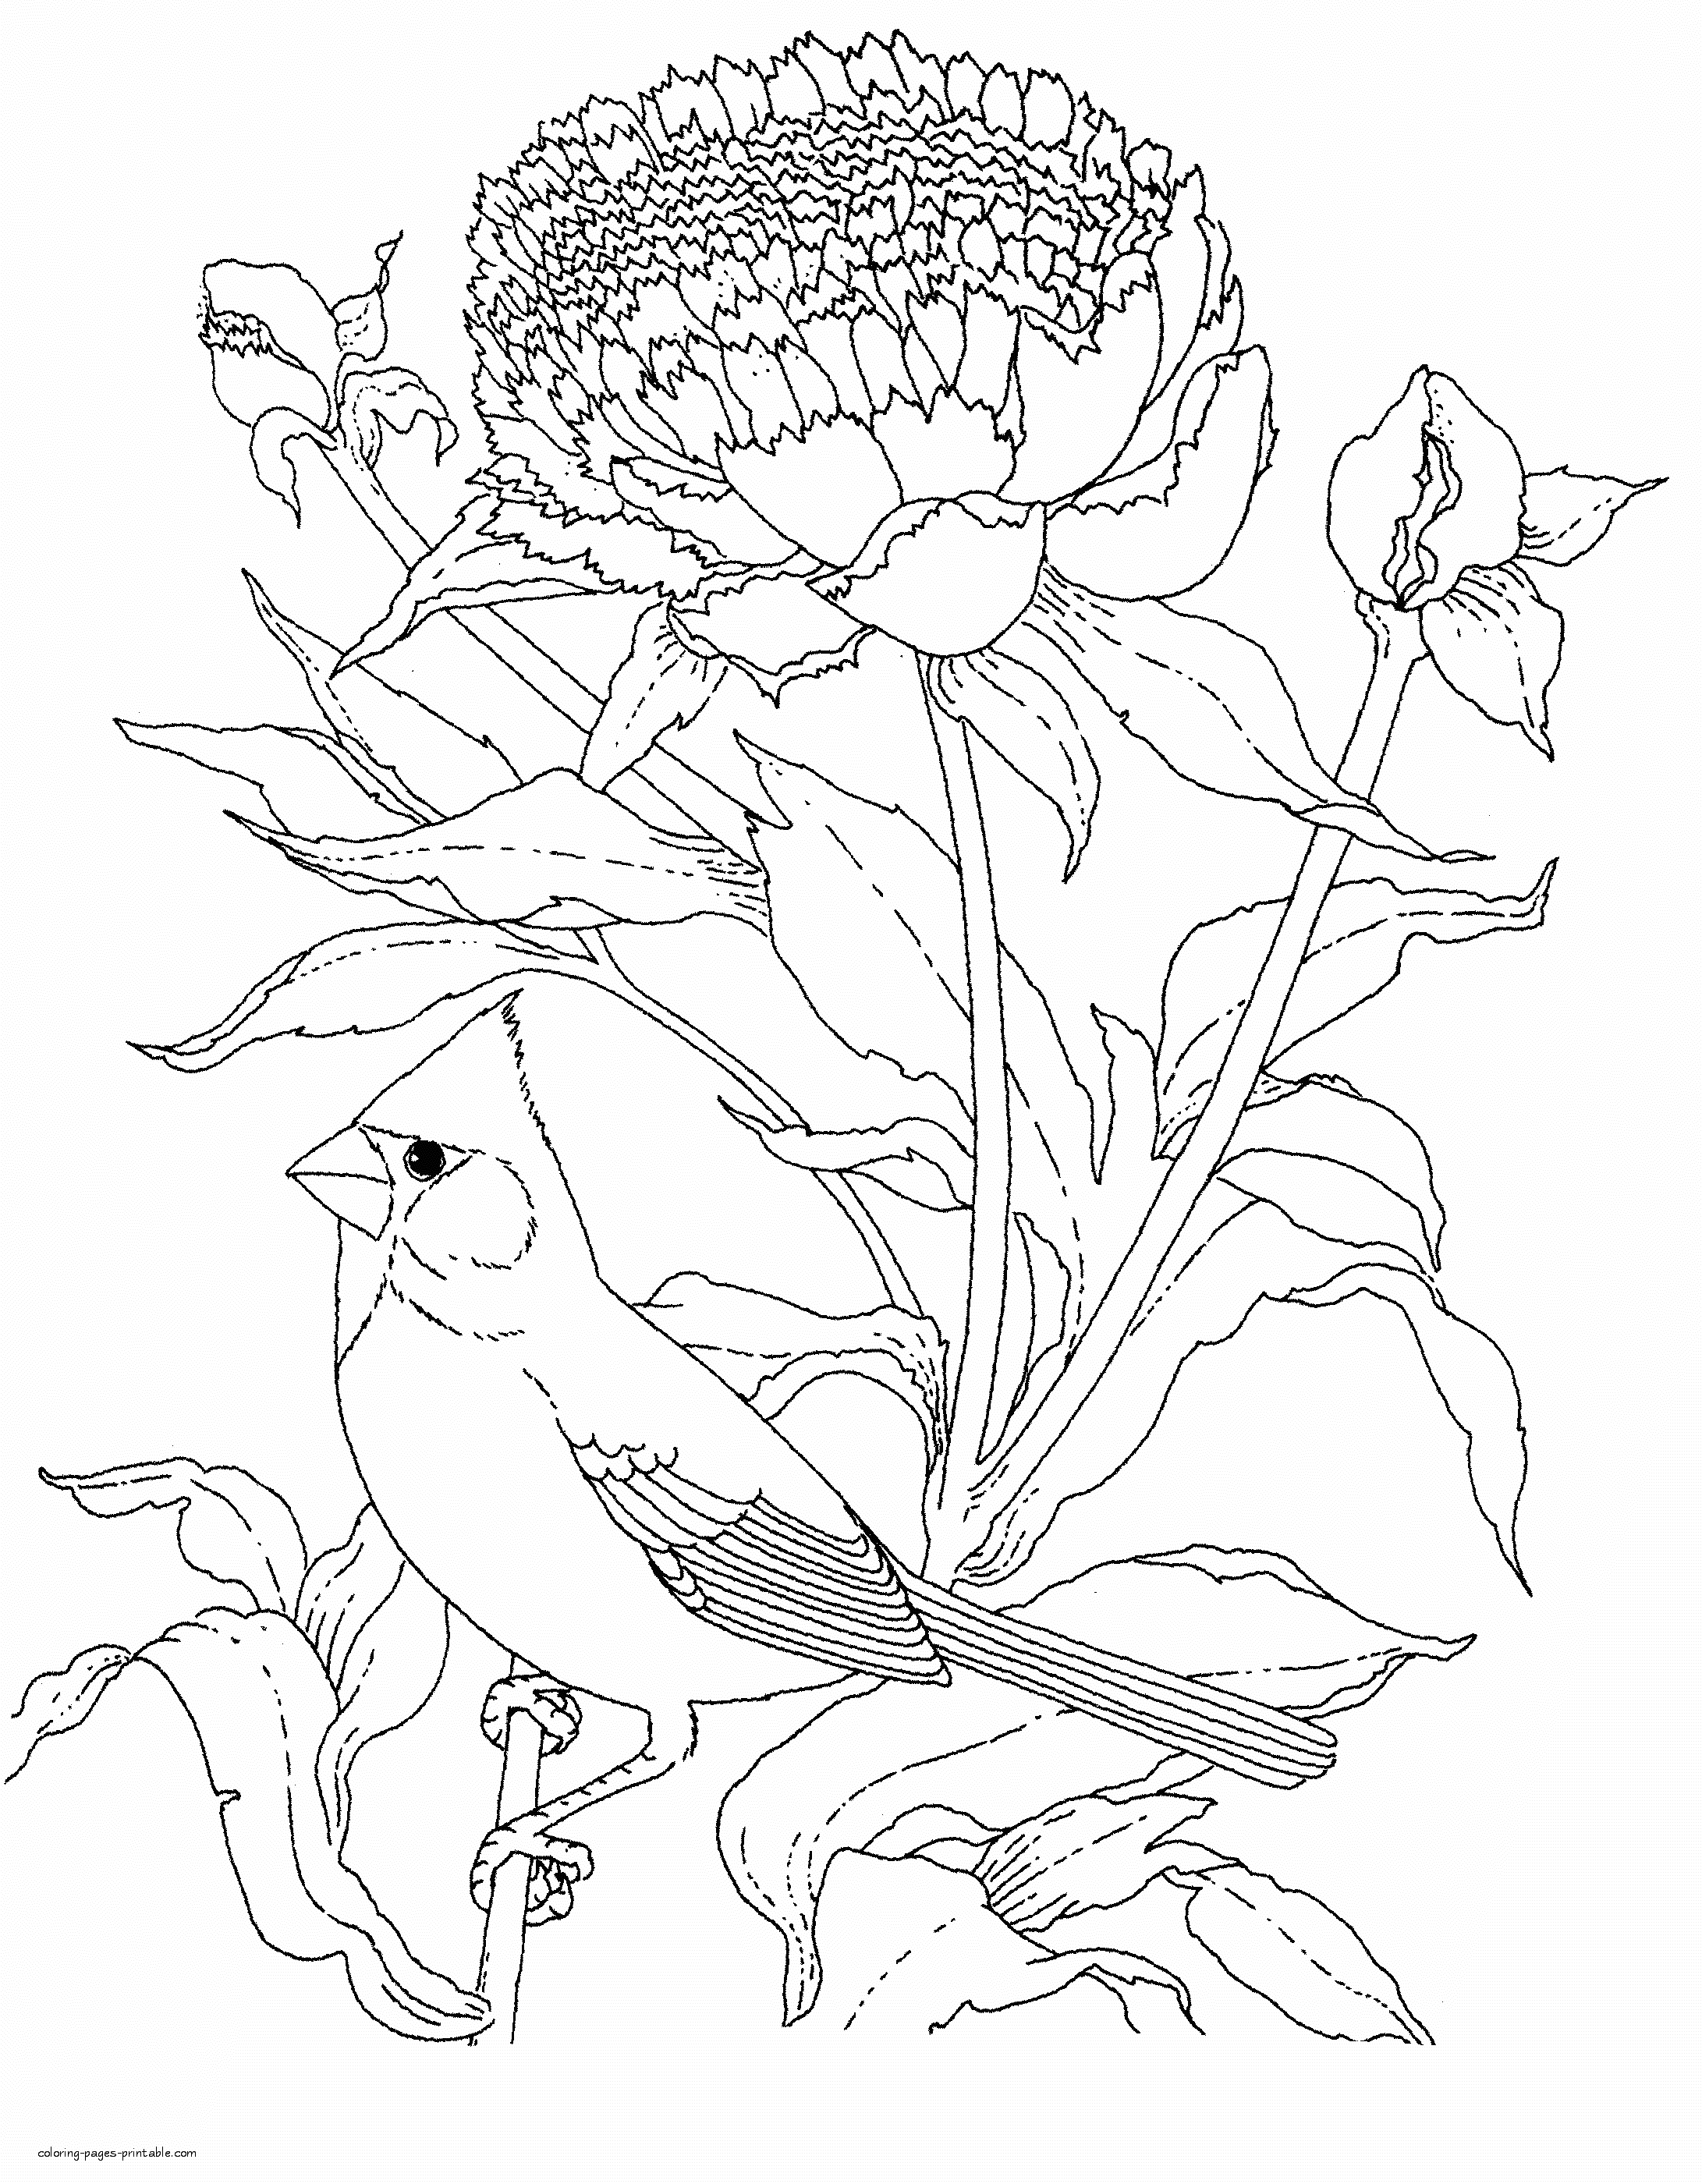 Realistic Birds. Coloring Pages For Adults    COLORING PAGES ...